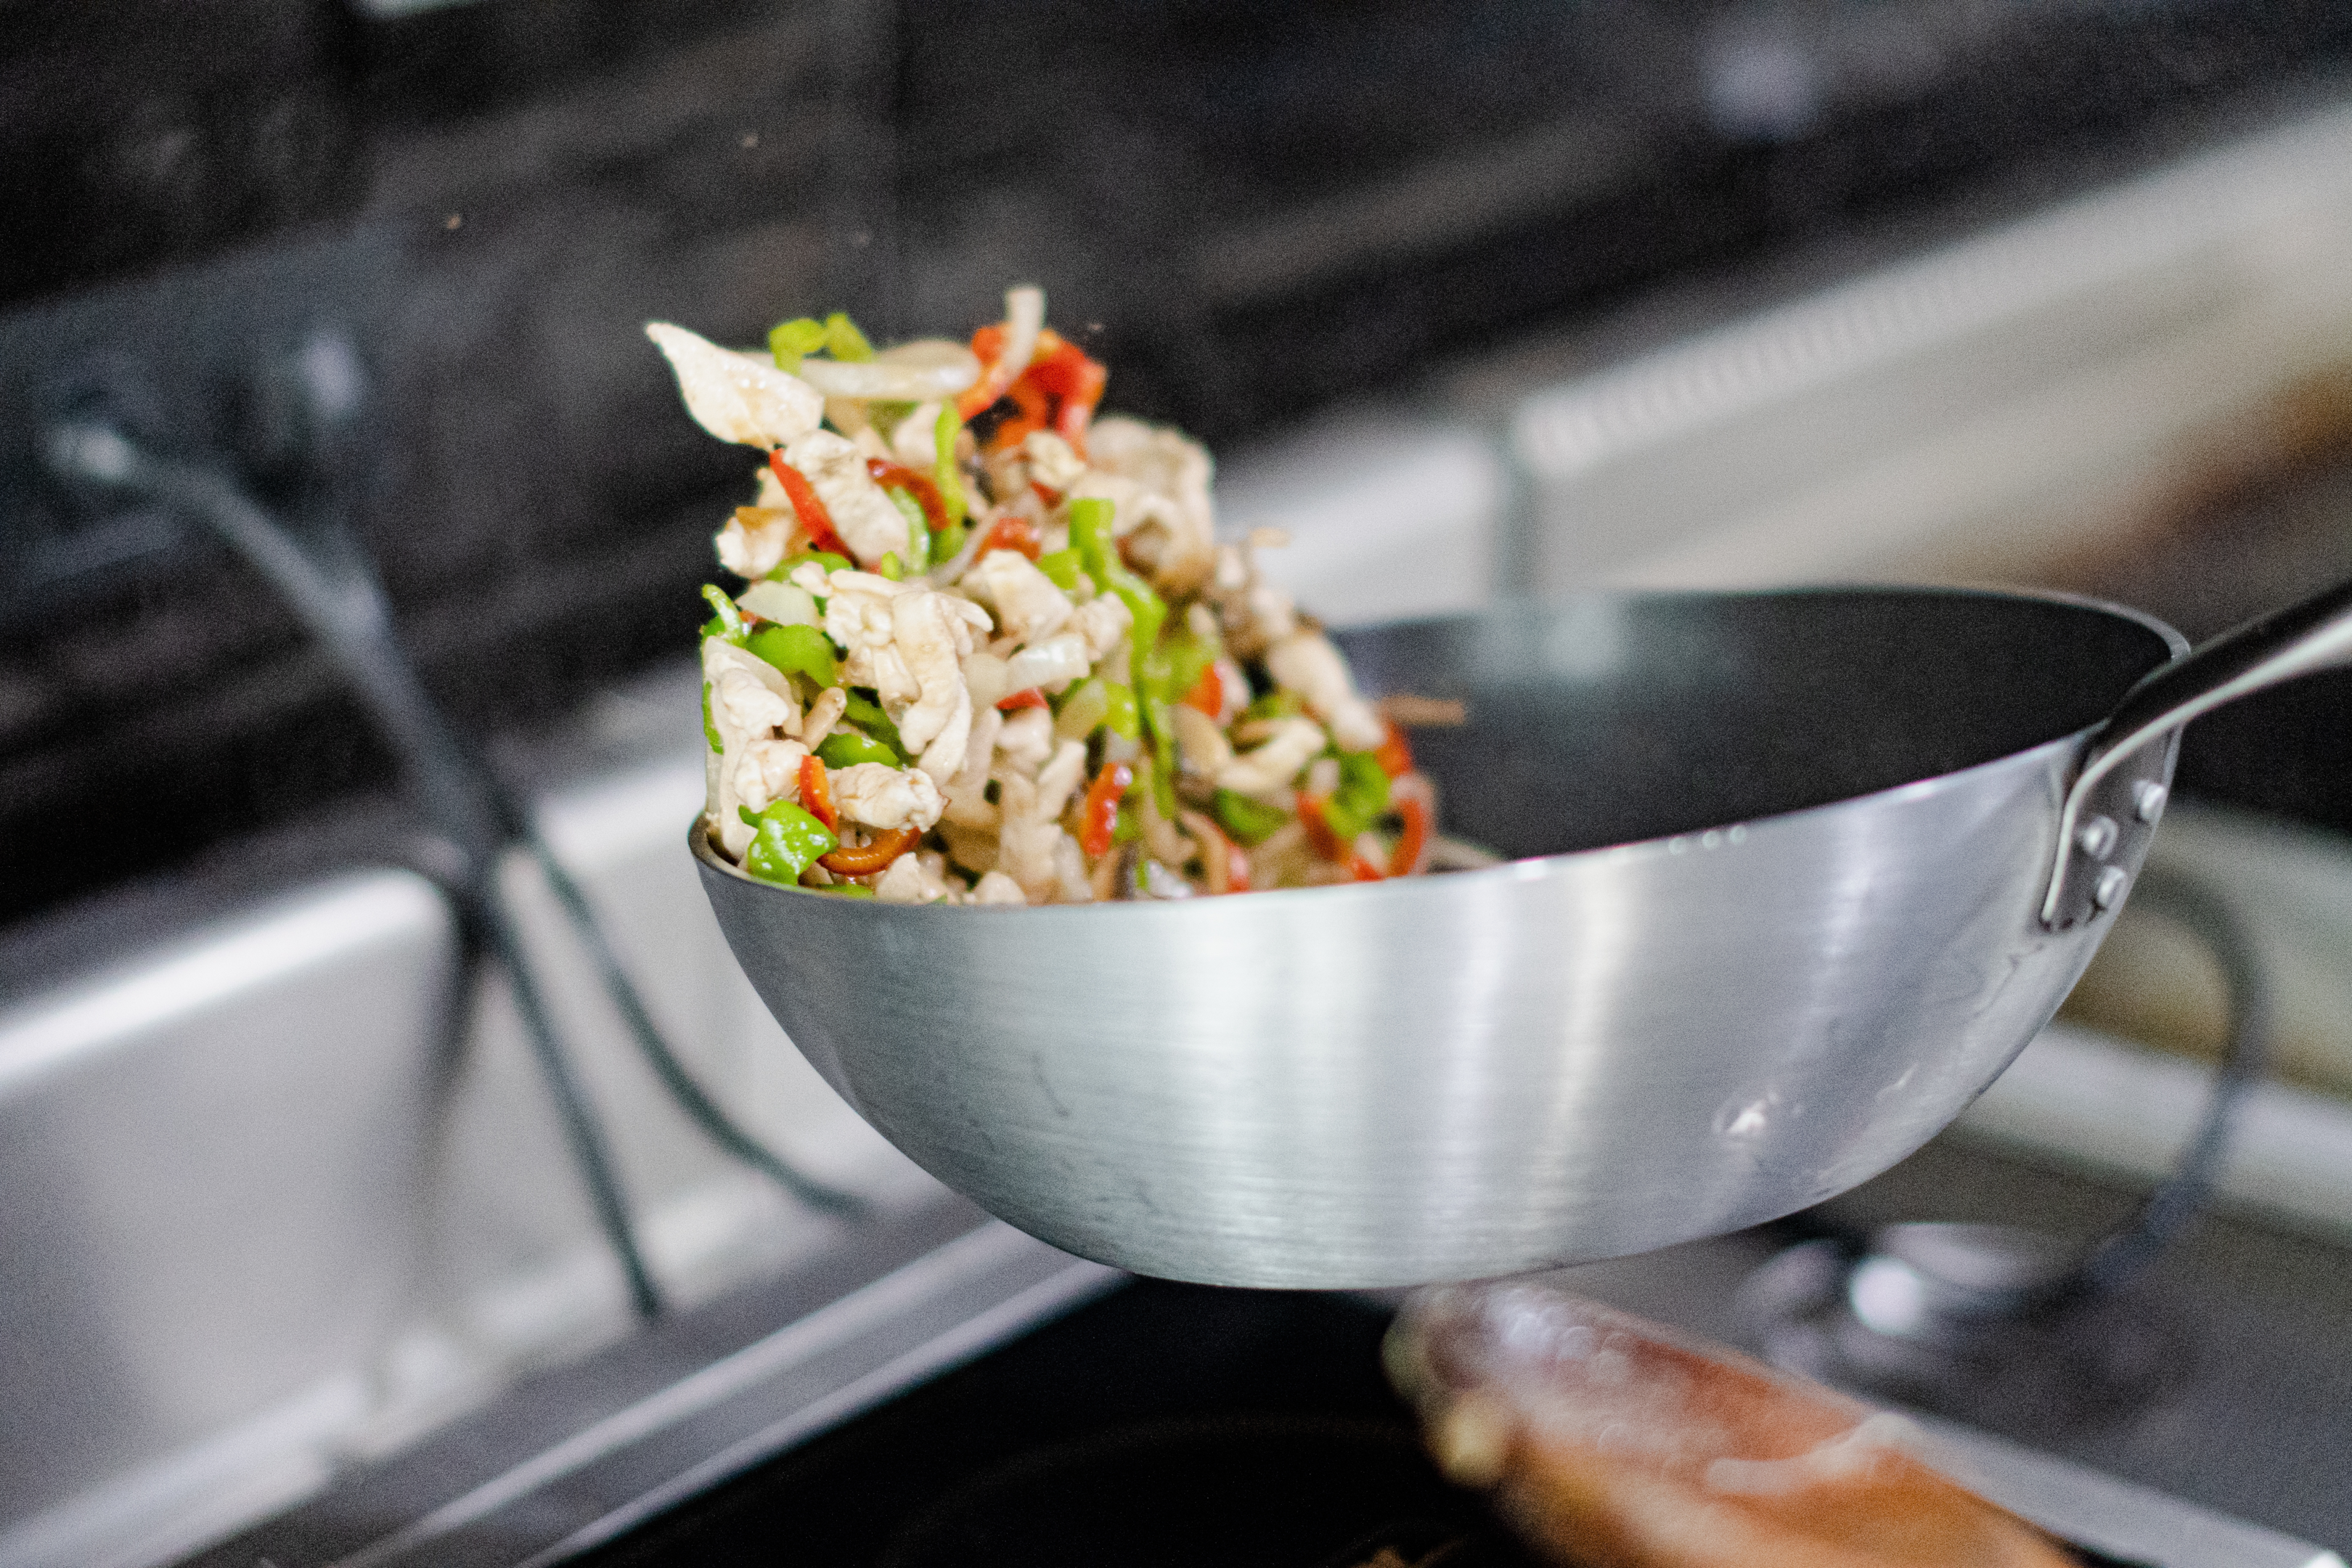 Stir frying is the most popular method of Chinese cooking.